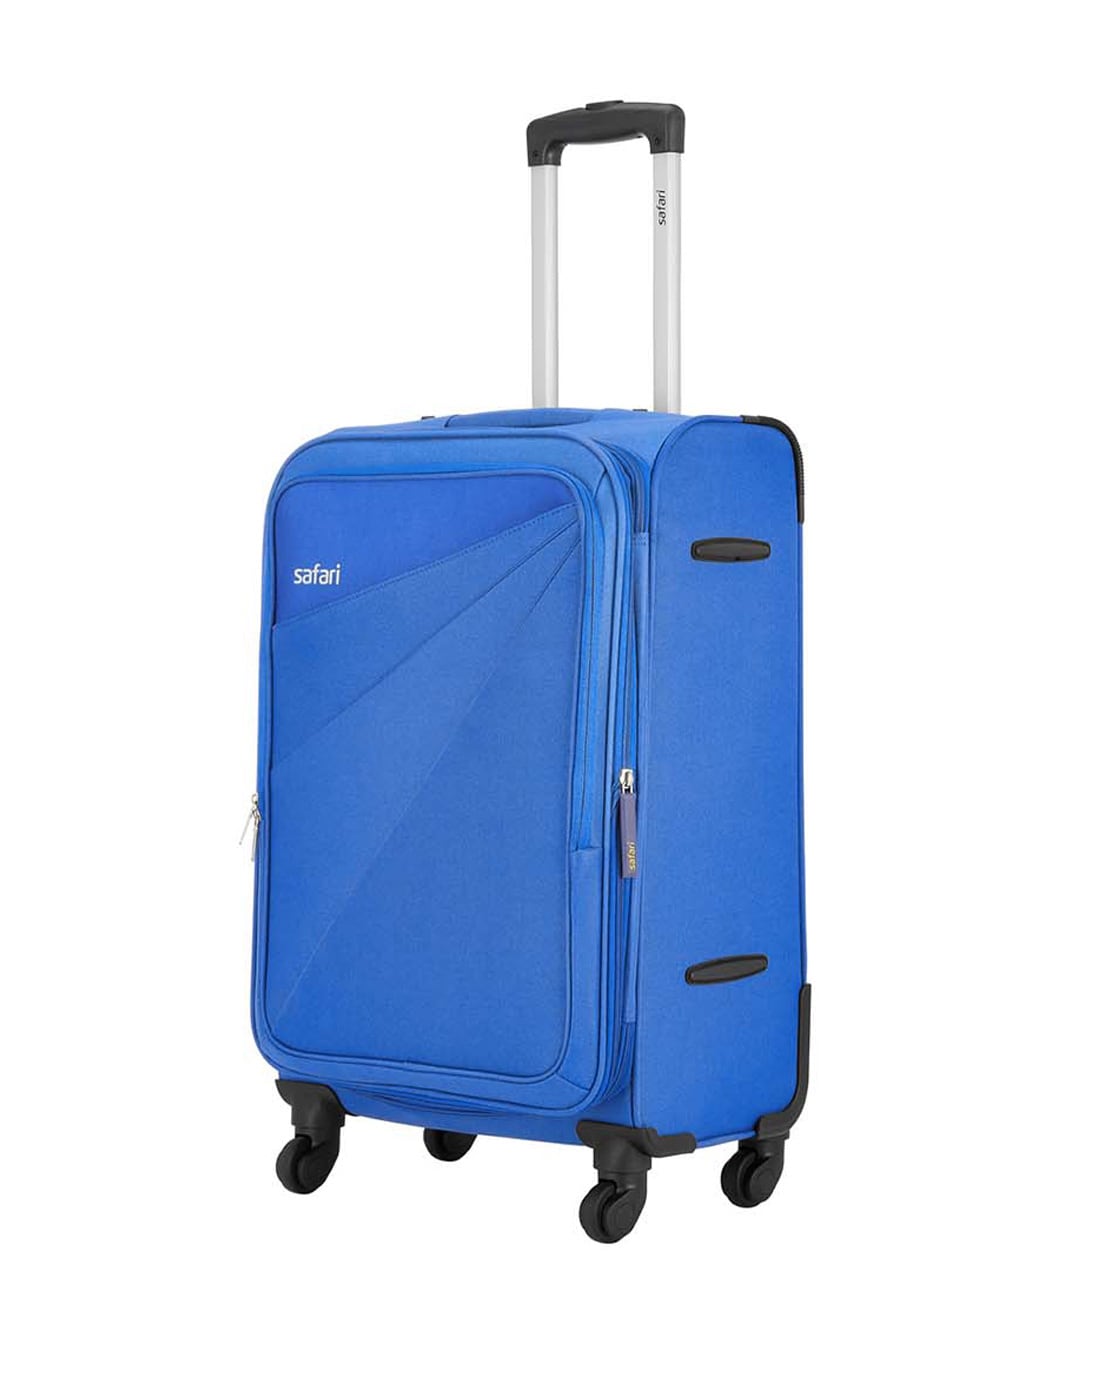 Safari Trolley Bag Javelin Duo, Size: 28 inch, for Travelling